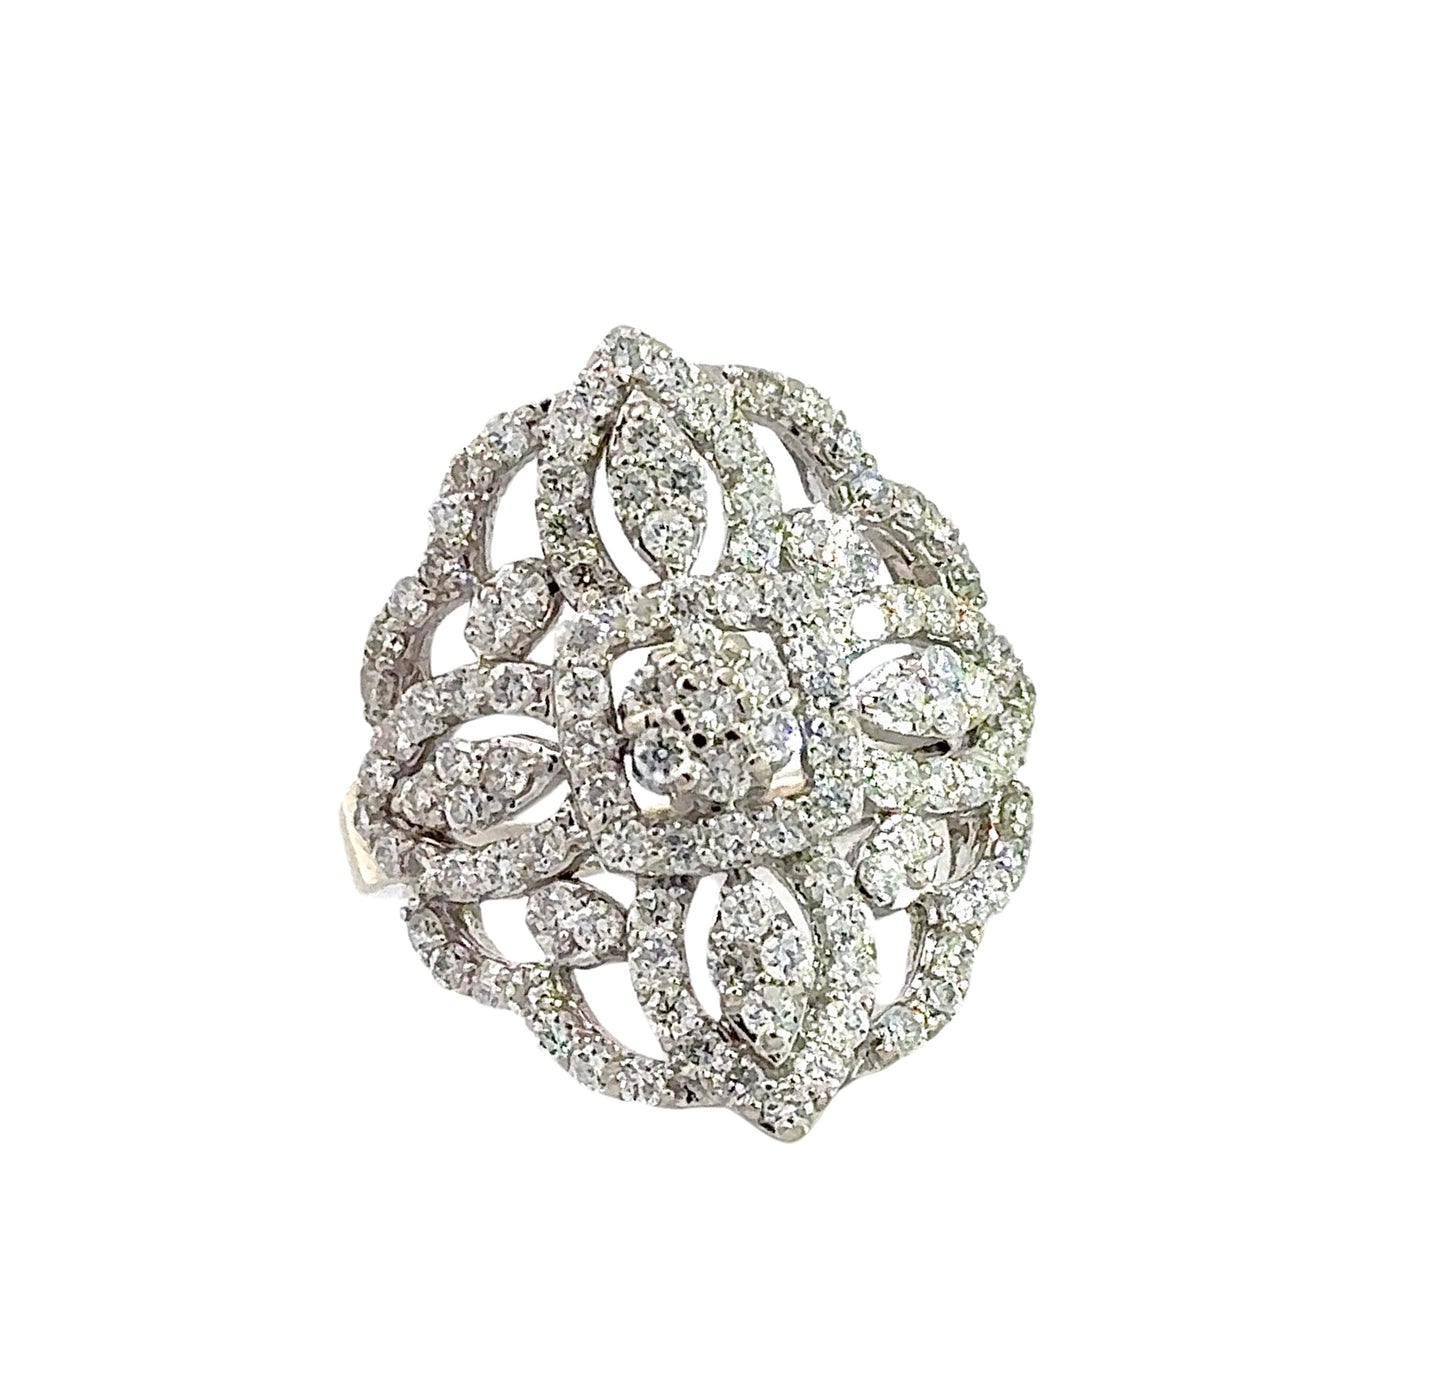 white gold floral statement diamond ring with clusters of diamonds surrounding small center flower